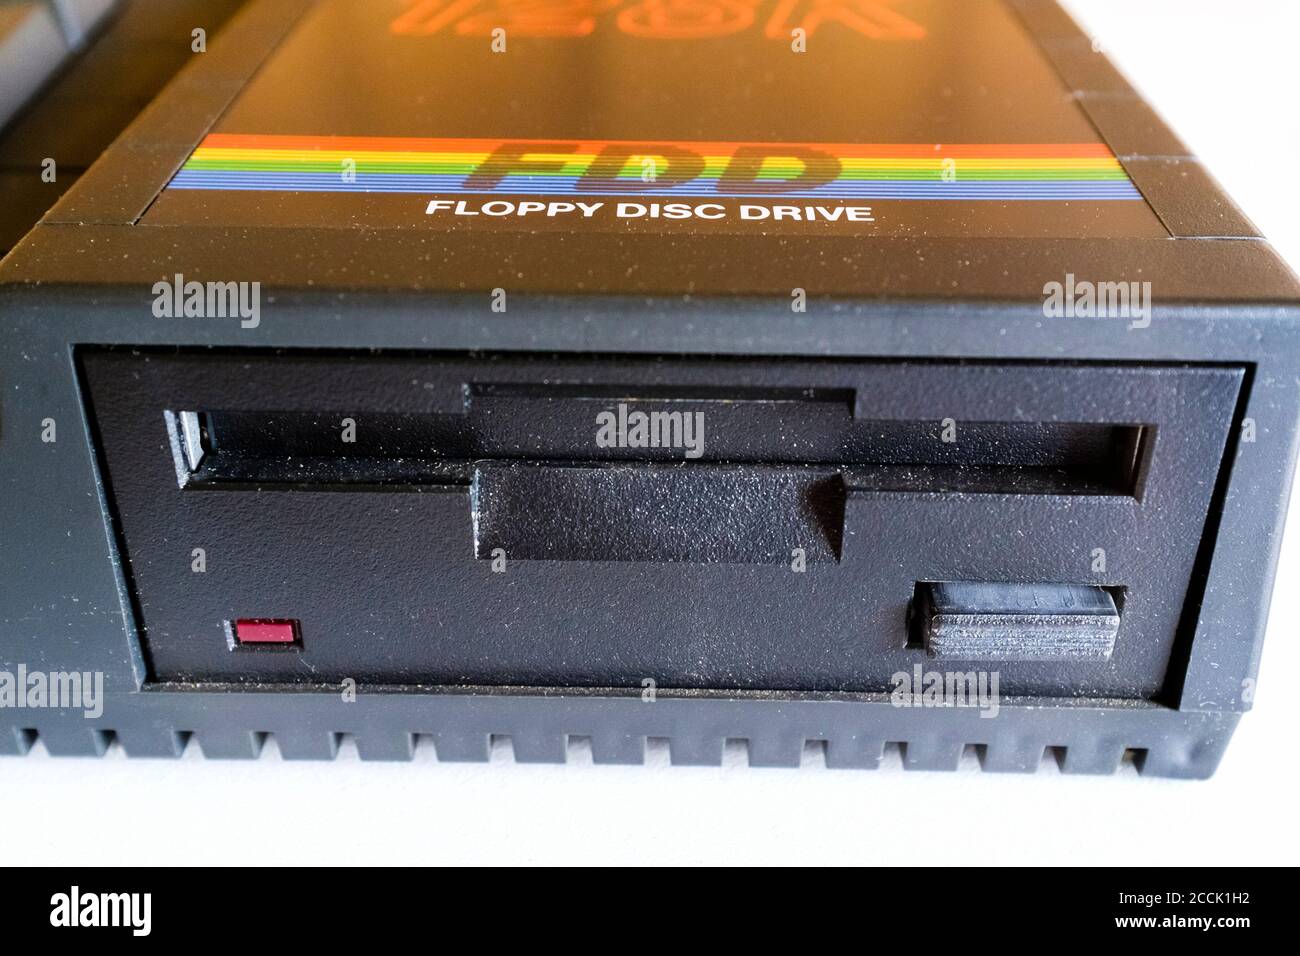 The built-in 3 inch floppy disc drive of the Sinclair ZX Spectrum +3 personal computer, launched in the UK in 1987. Stock Photo